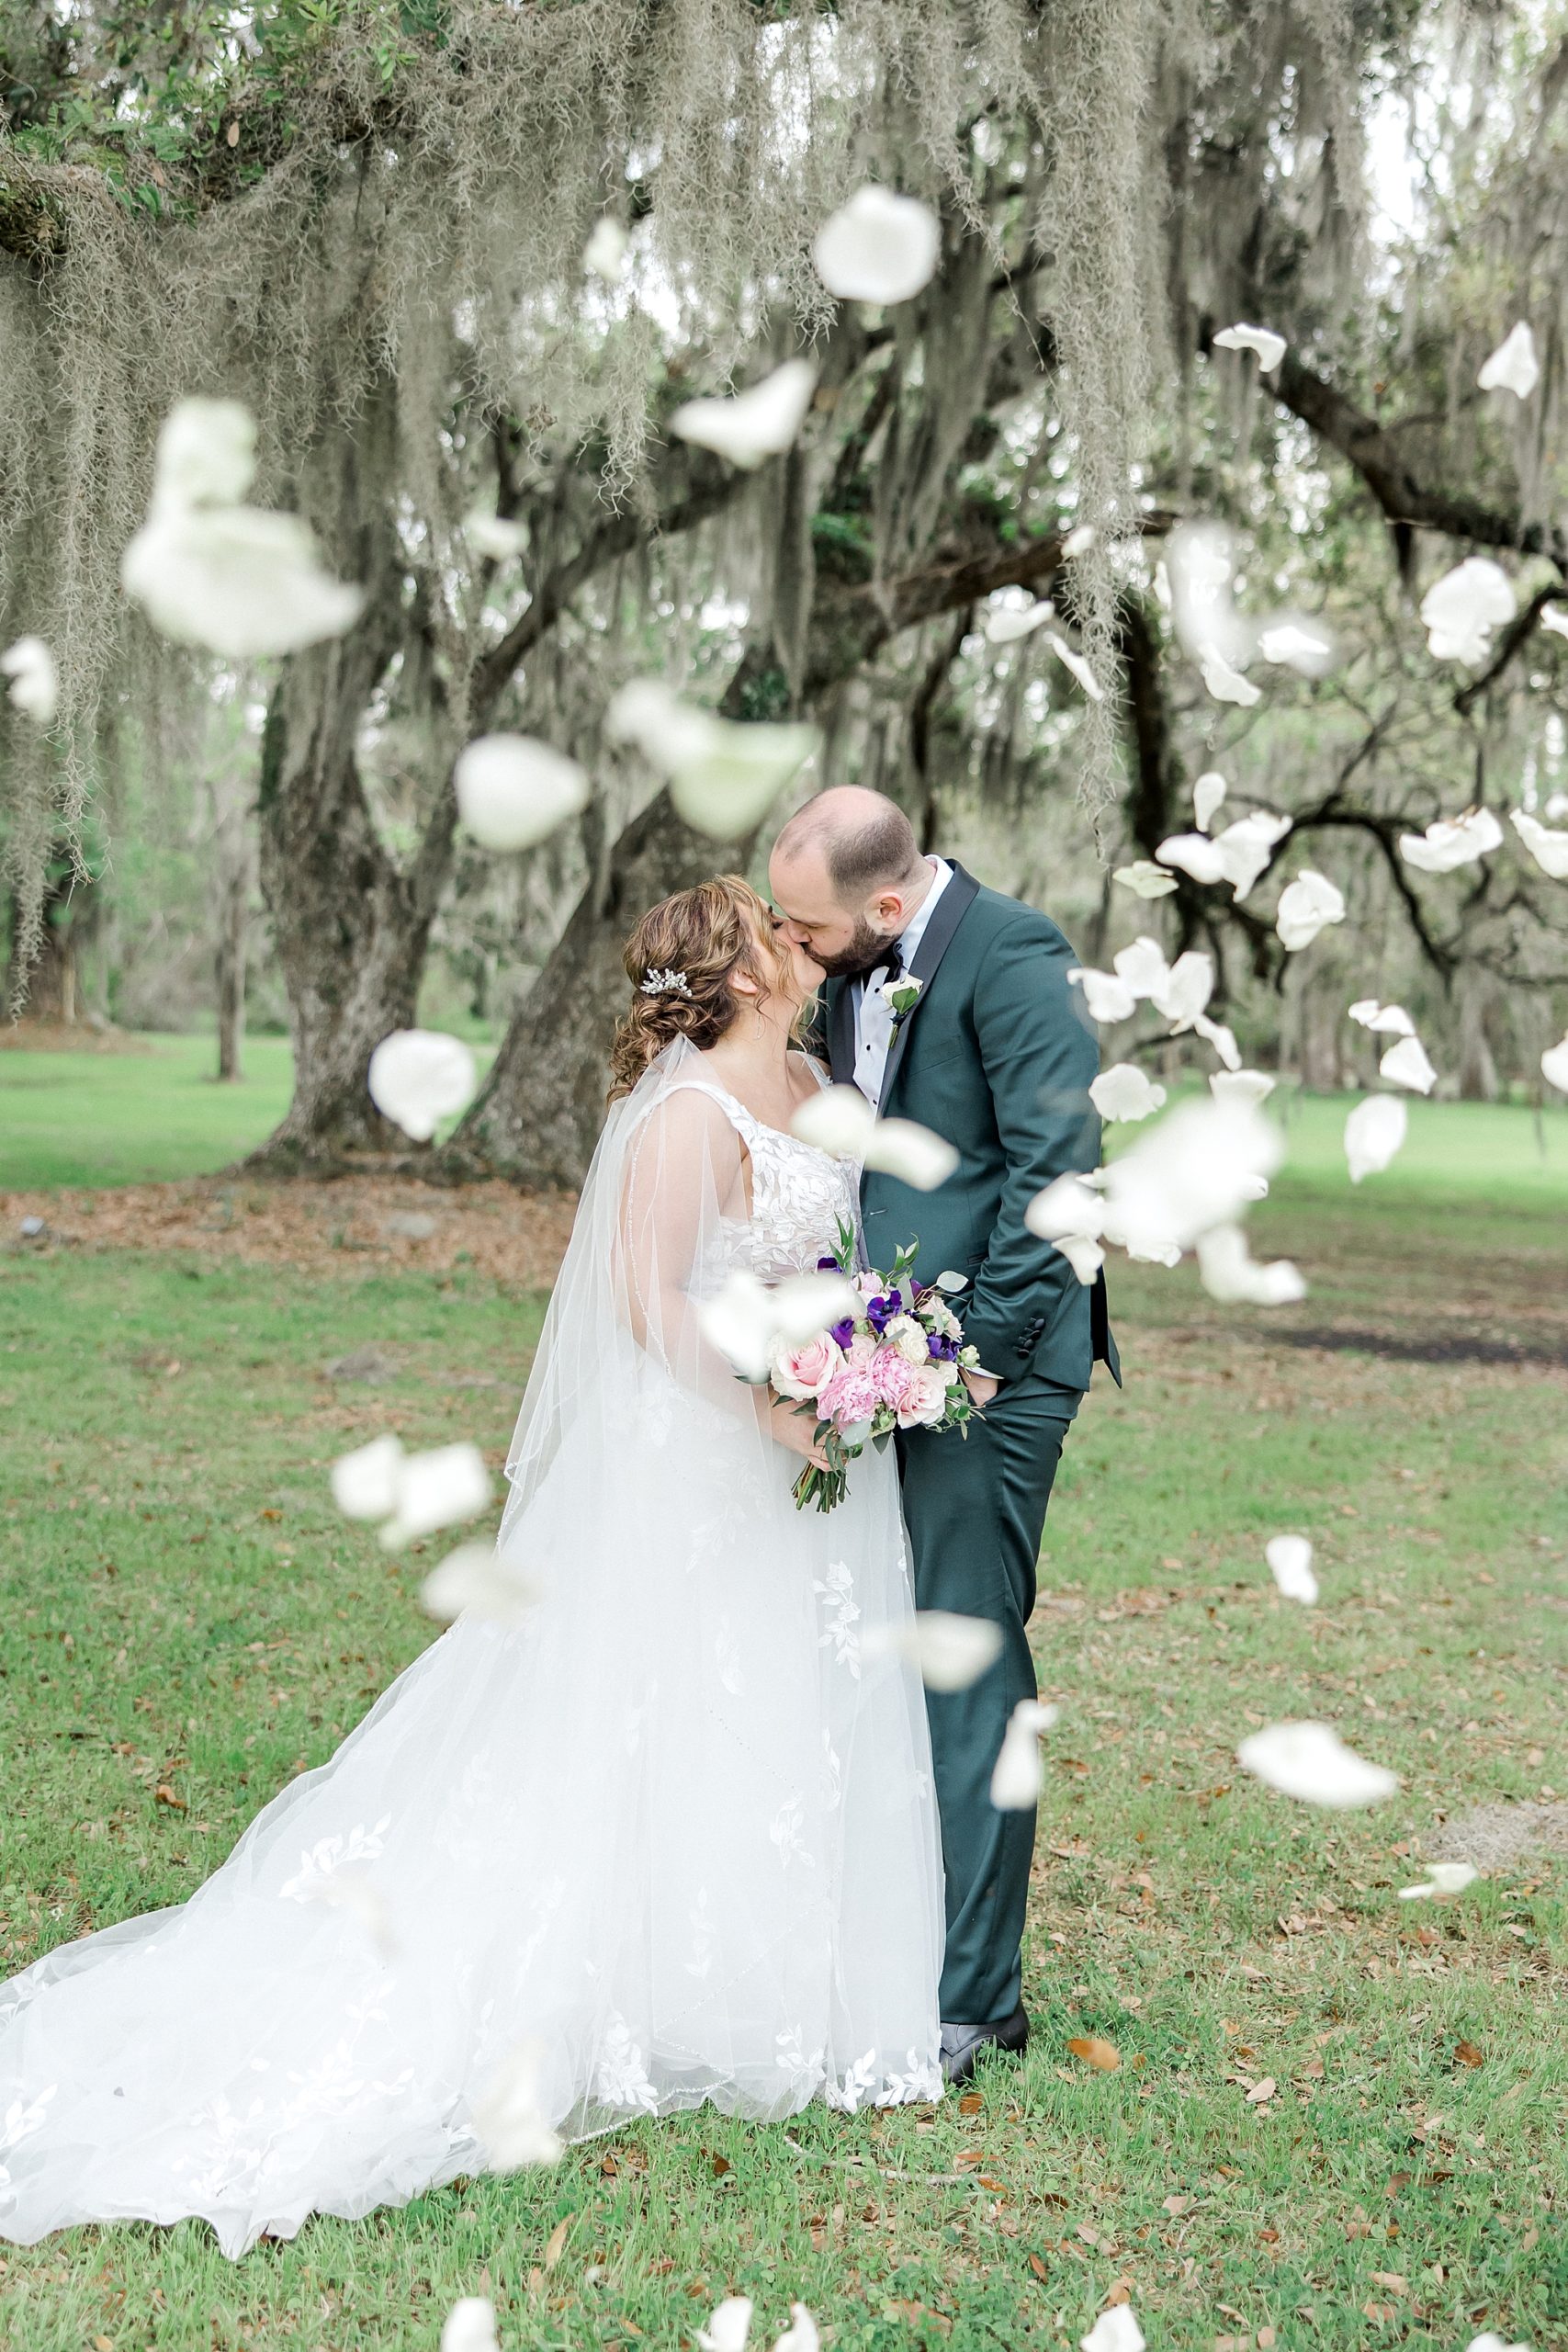 flowers rain down on bride and groom as they kiss